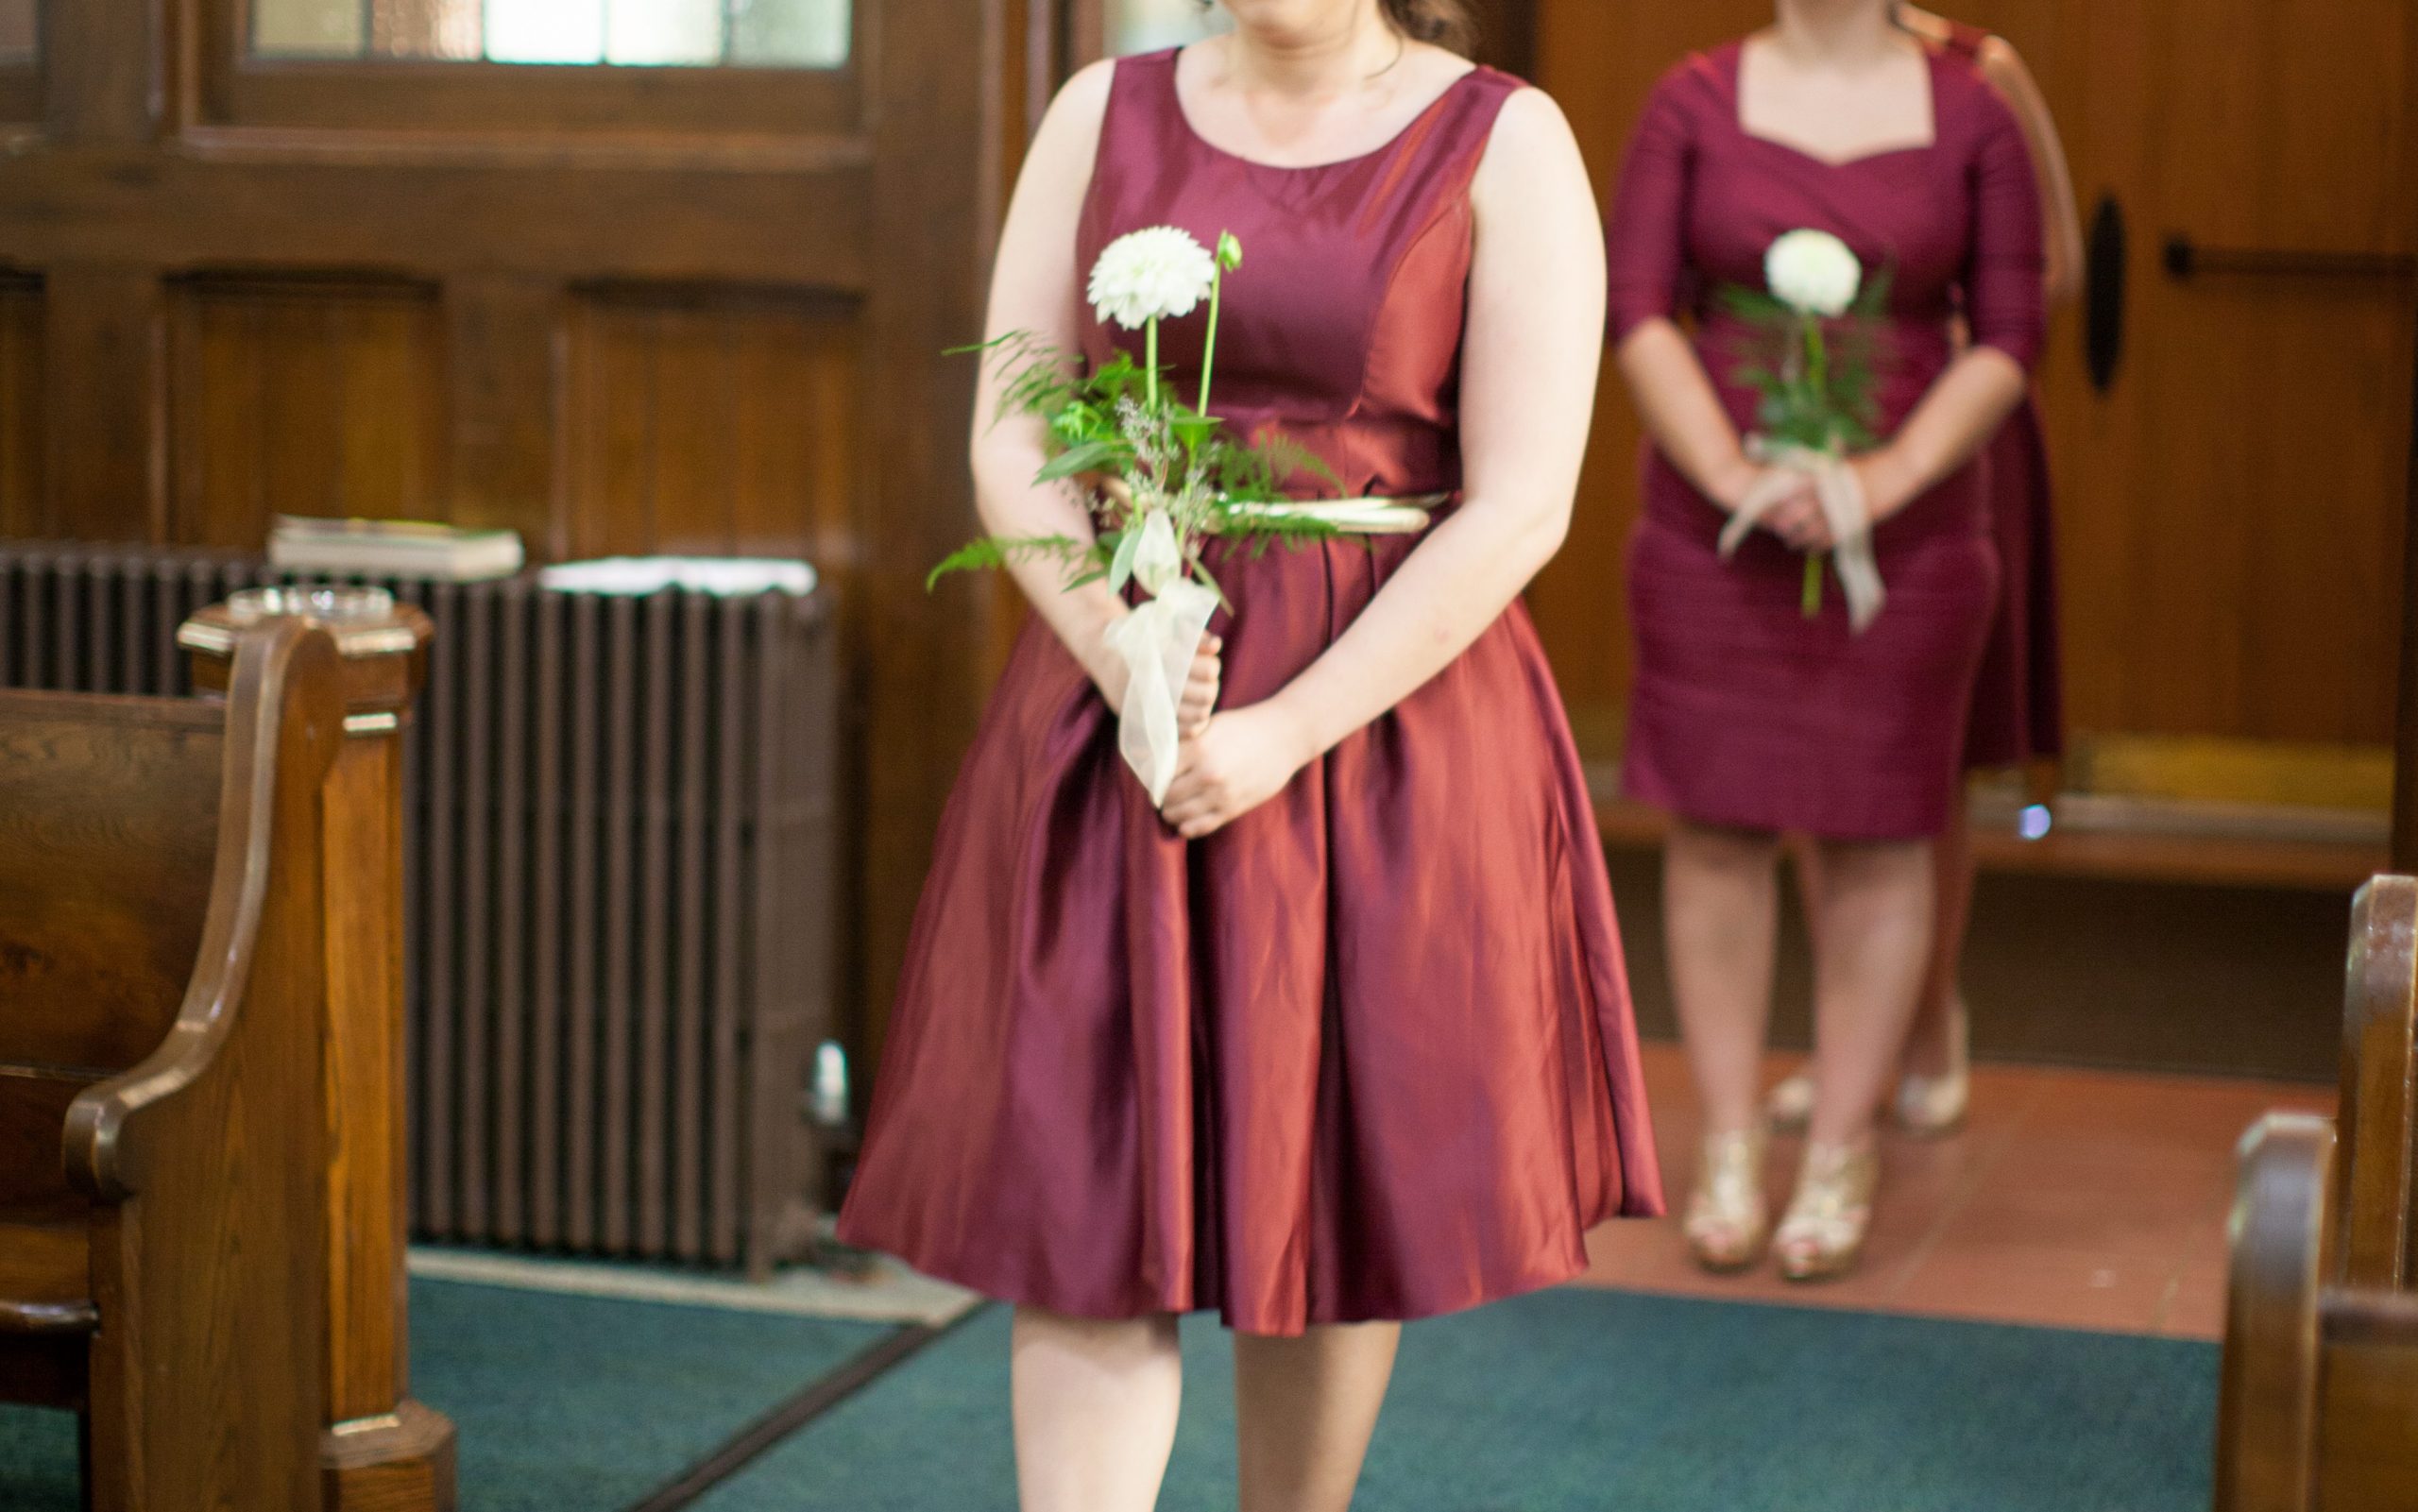 Bridesmaids in burgundy dresses holding a white statement flower